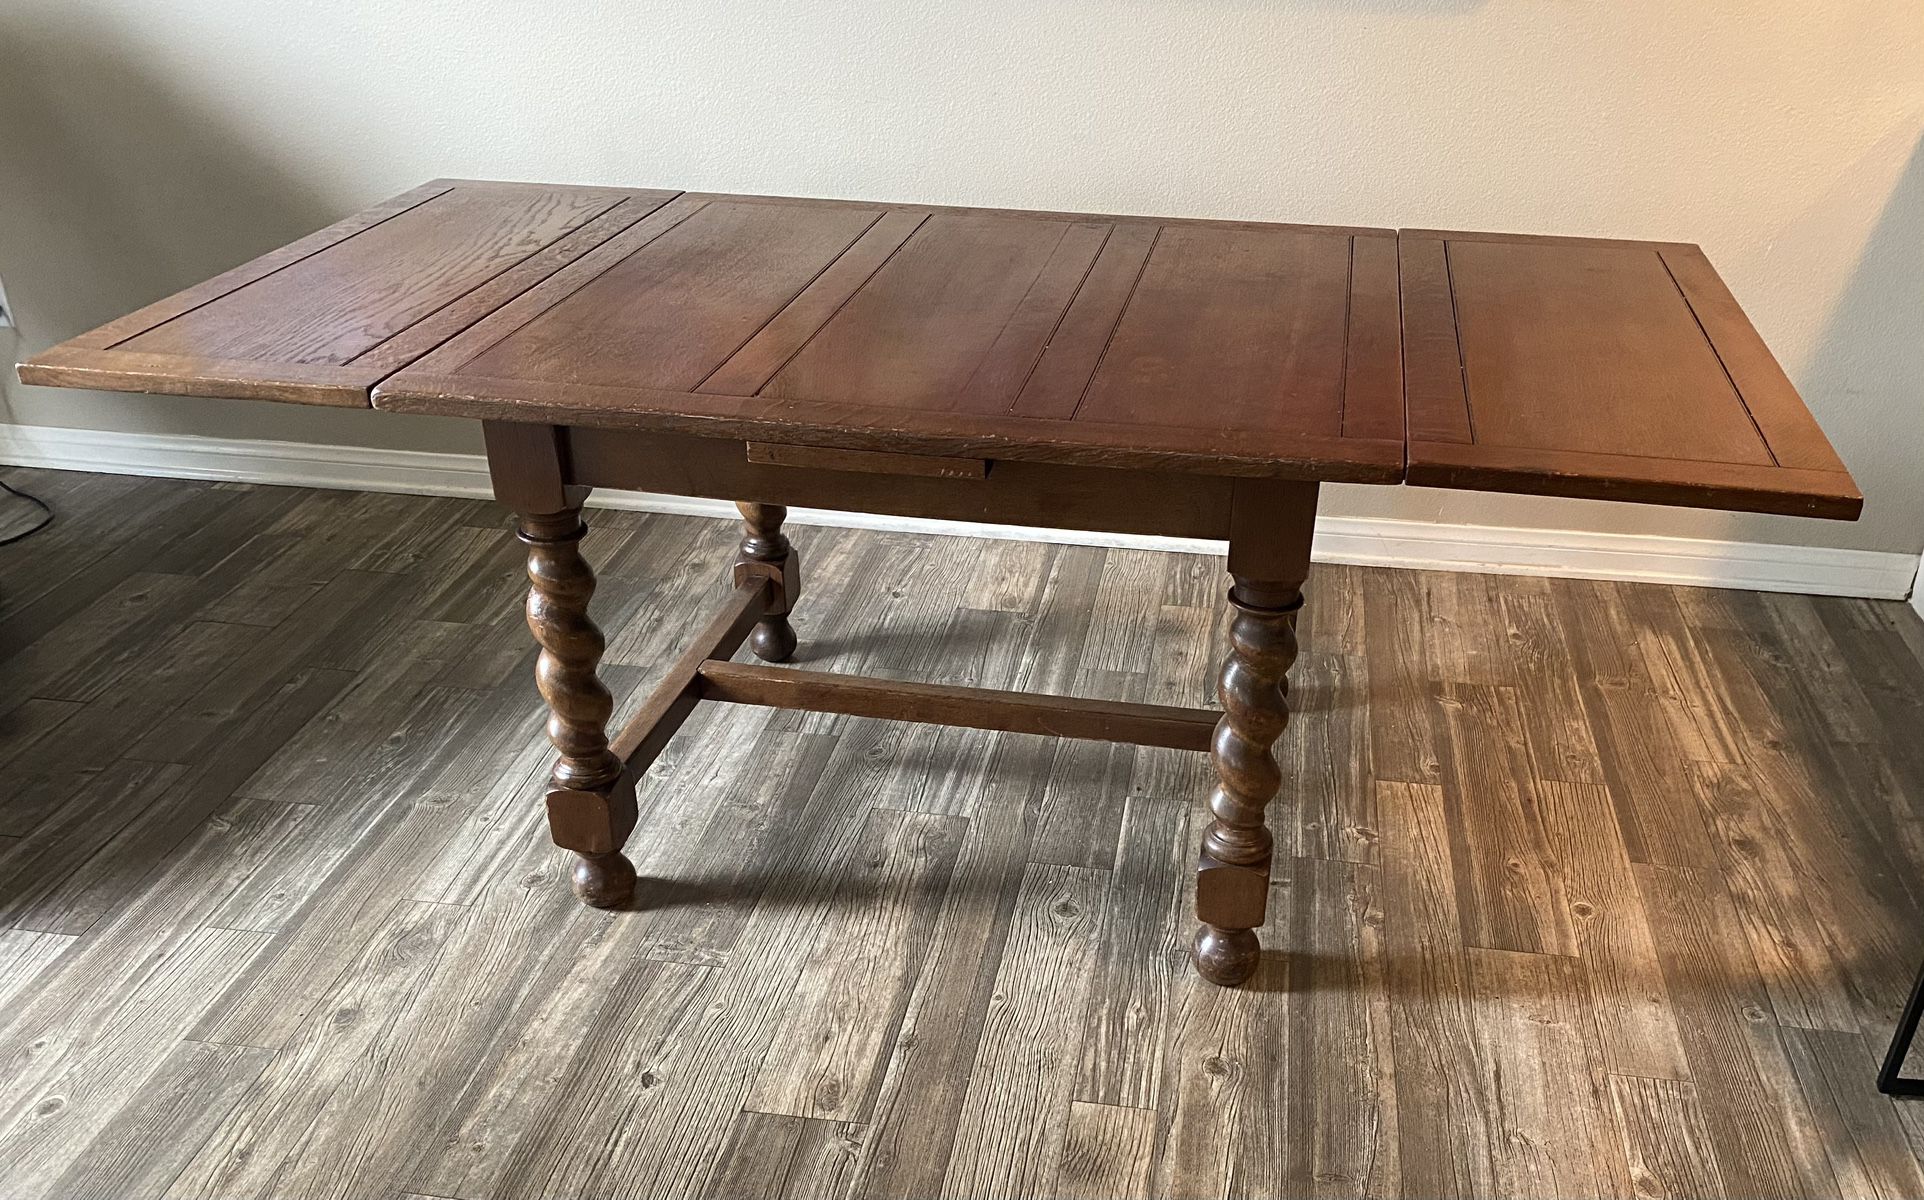 50 Year Old Antique Oak Table